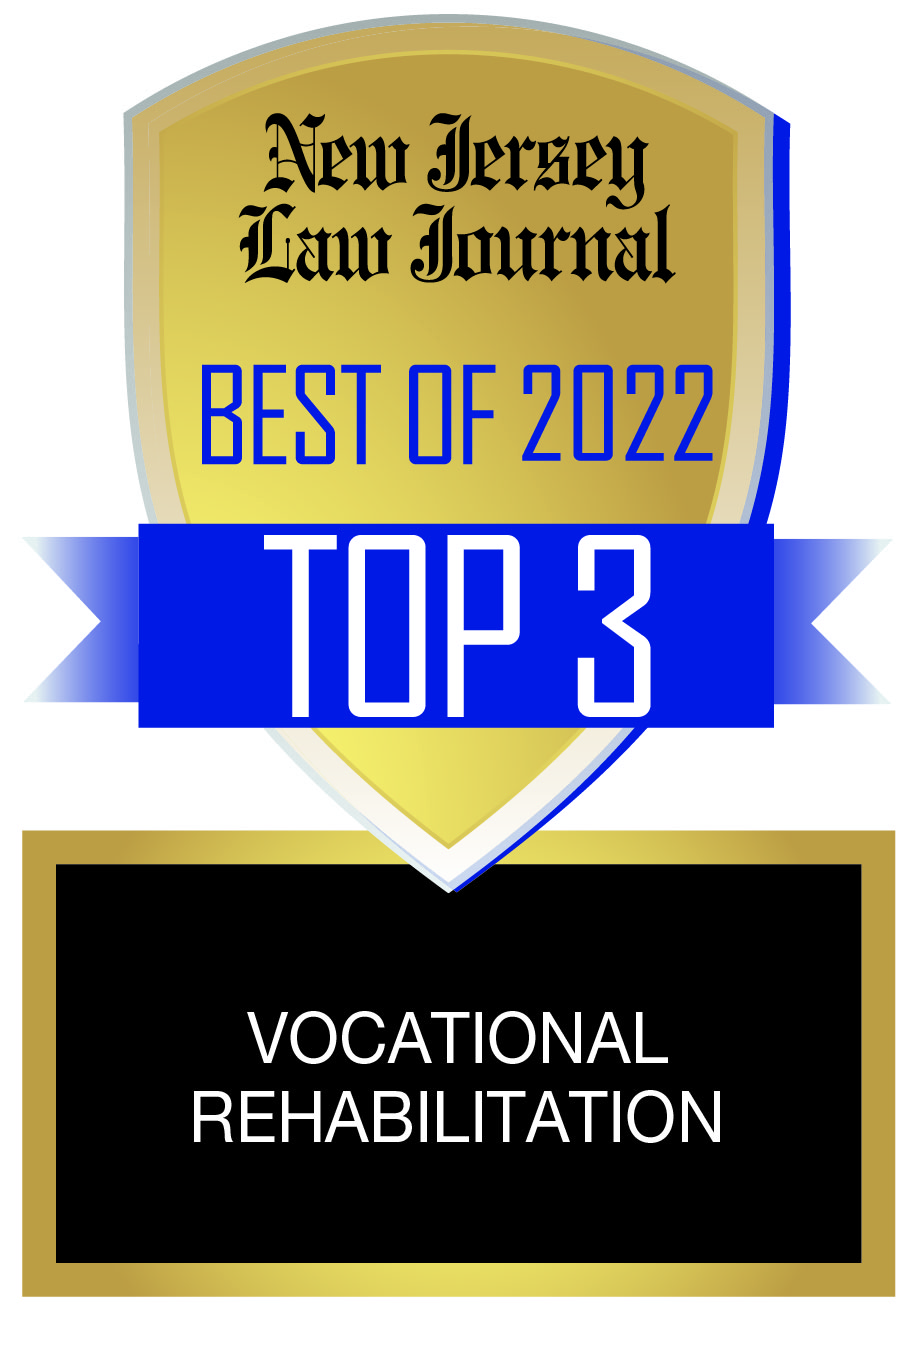 New Jersey Law Journal - Vocational Rehabilitation Best of 2022